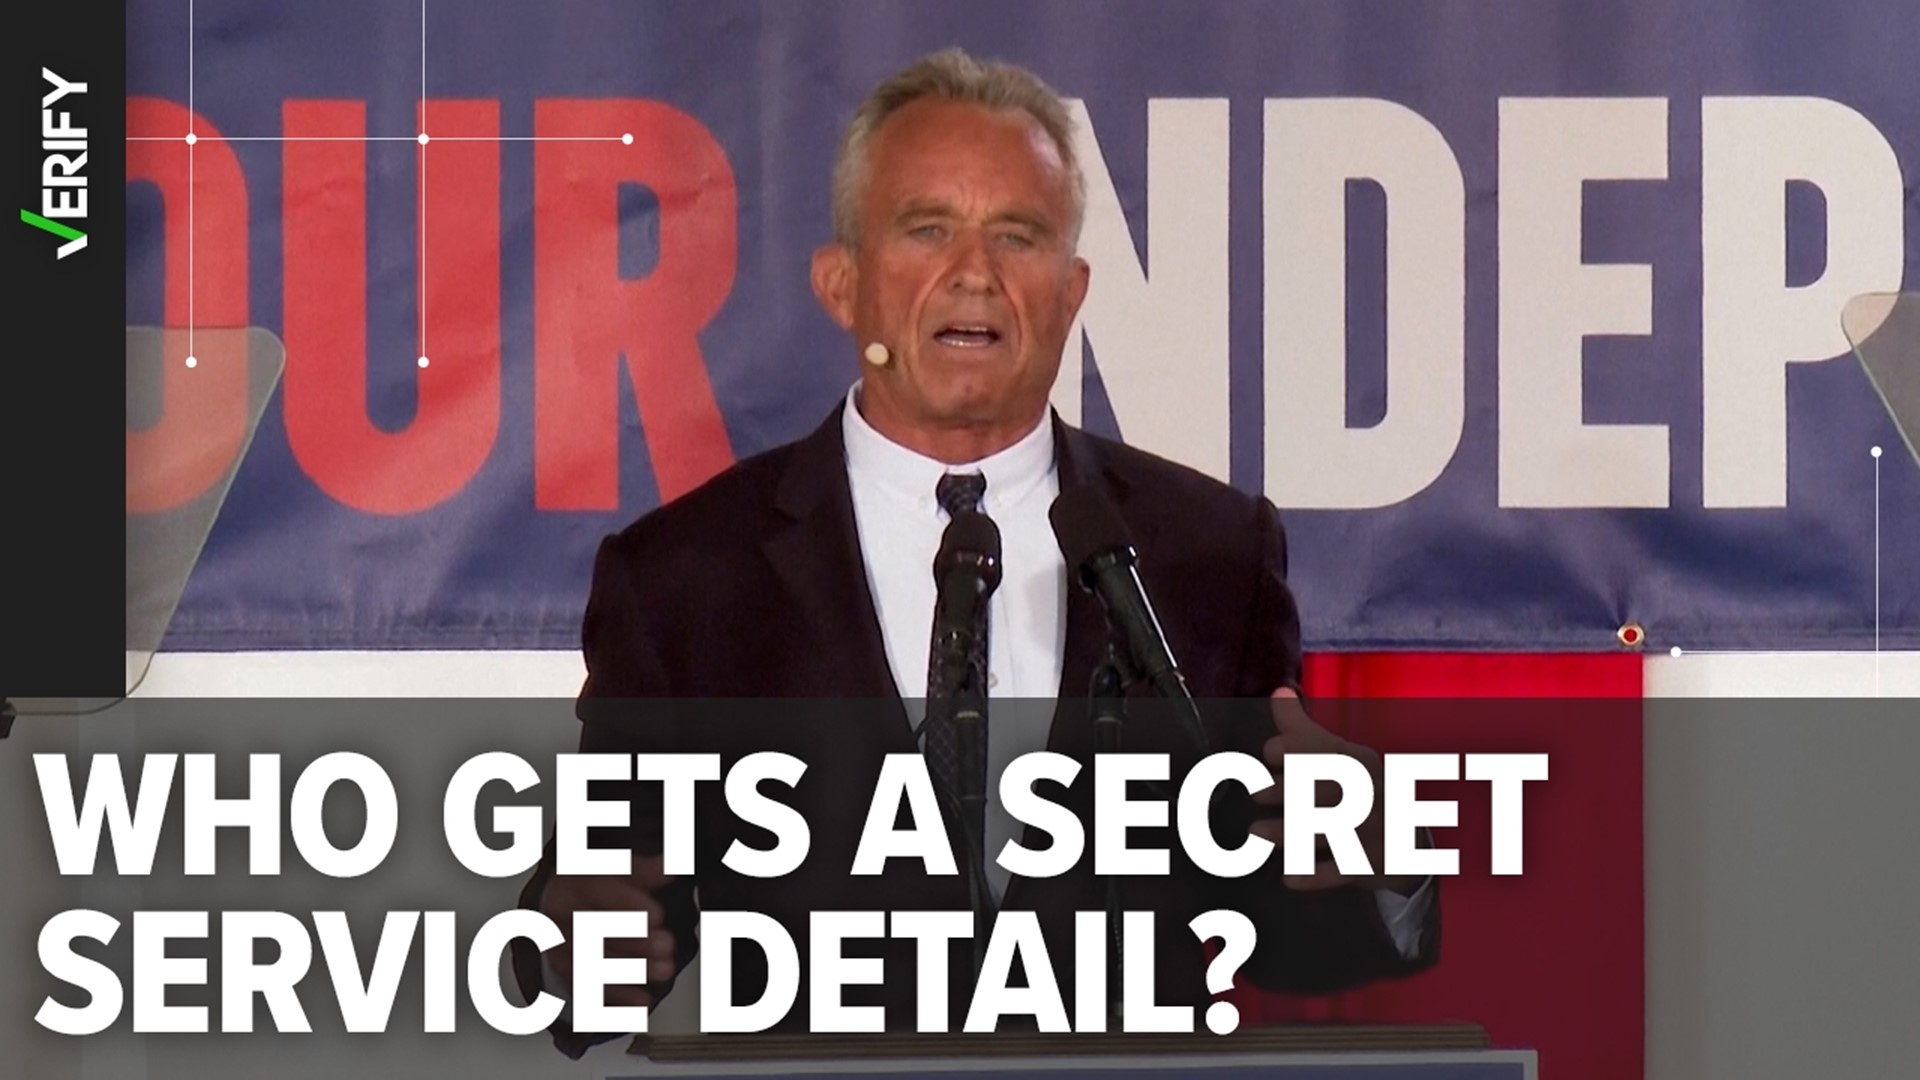 The Secretary of Homeland Security grants Secret Service protection to “major candidates” – why Robert F. Kennedy Jr. doesn’t currently meet historical standards.